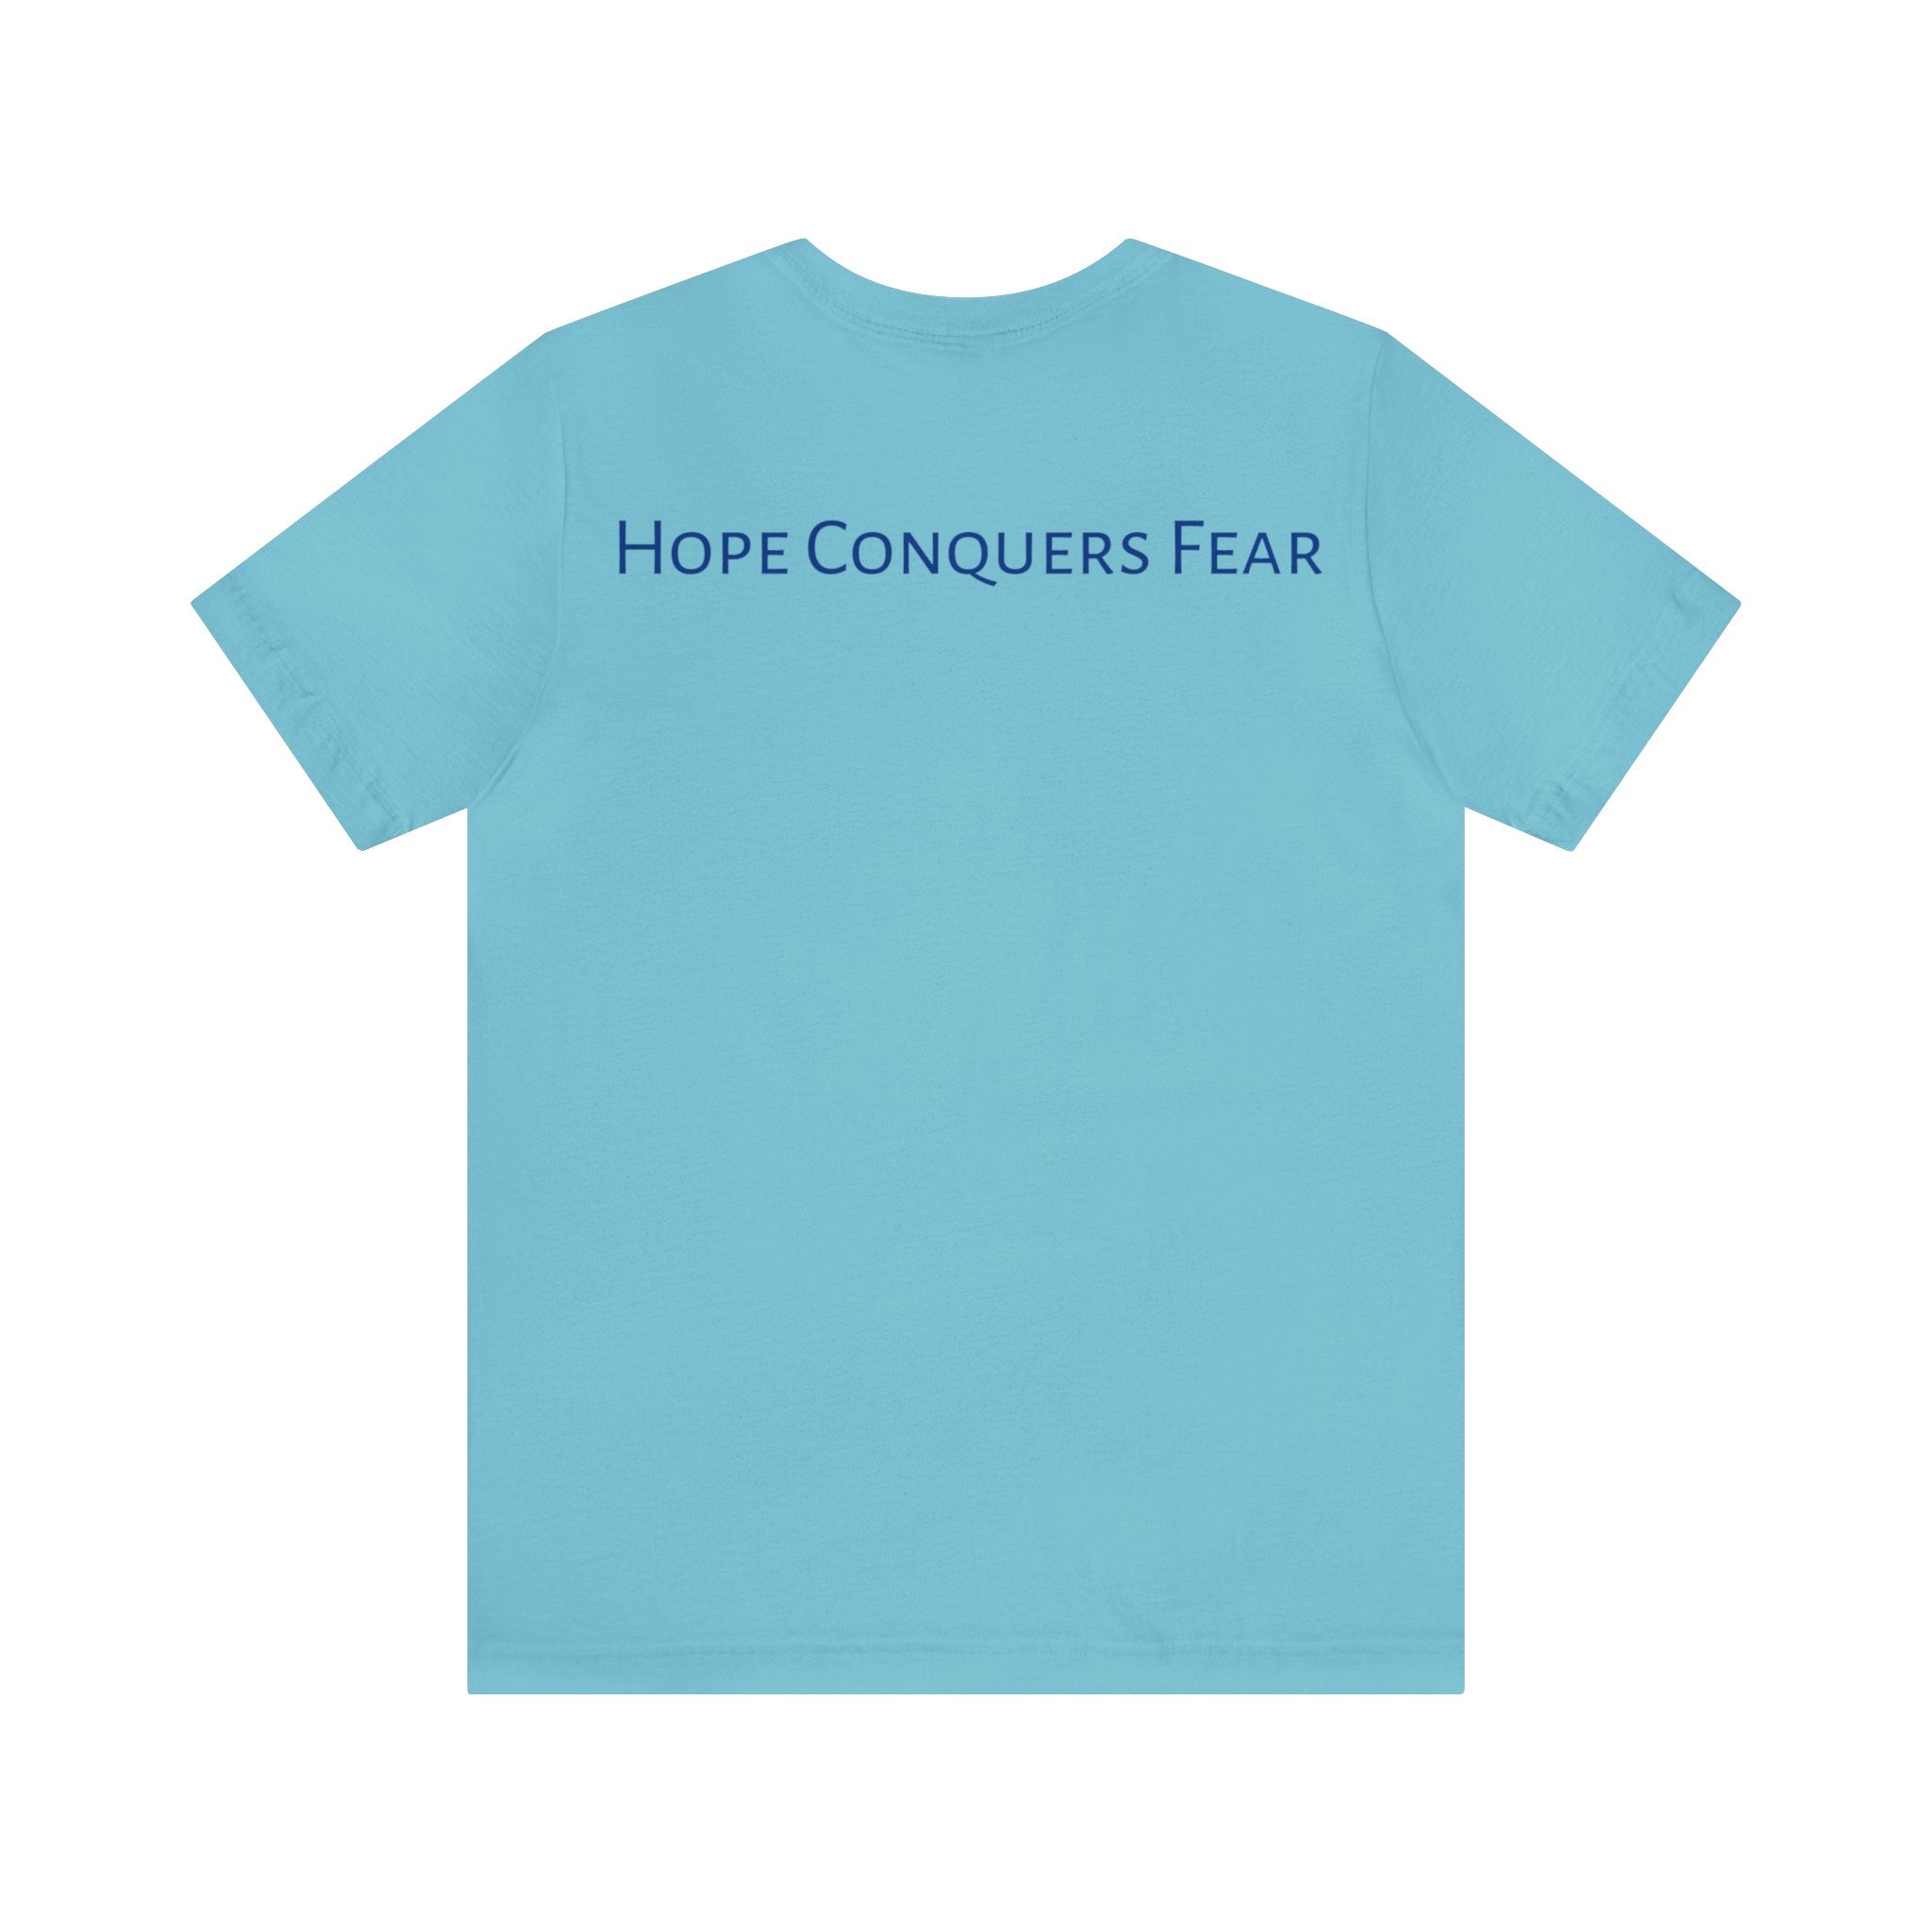 Hope Conquers Fear Jersey Tee - Bella+Canvas 3001 Heather Ice Blue Airlume Cotton Bella+Canvas 3001 Crew Neckline Jersey Short Sleeve Lightweight Fabric Mental Health Support Retail Fit Tear-away Label Tee Unisex Tee T-Shirt 11396919728494197989_2048 Printify